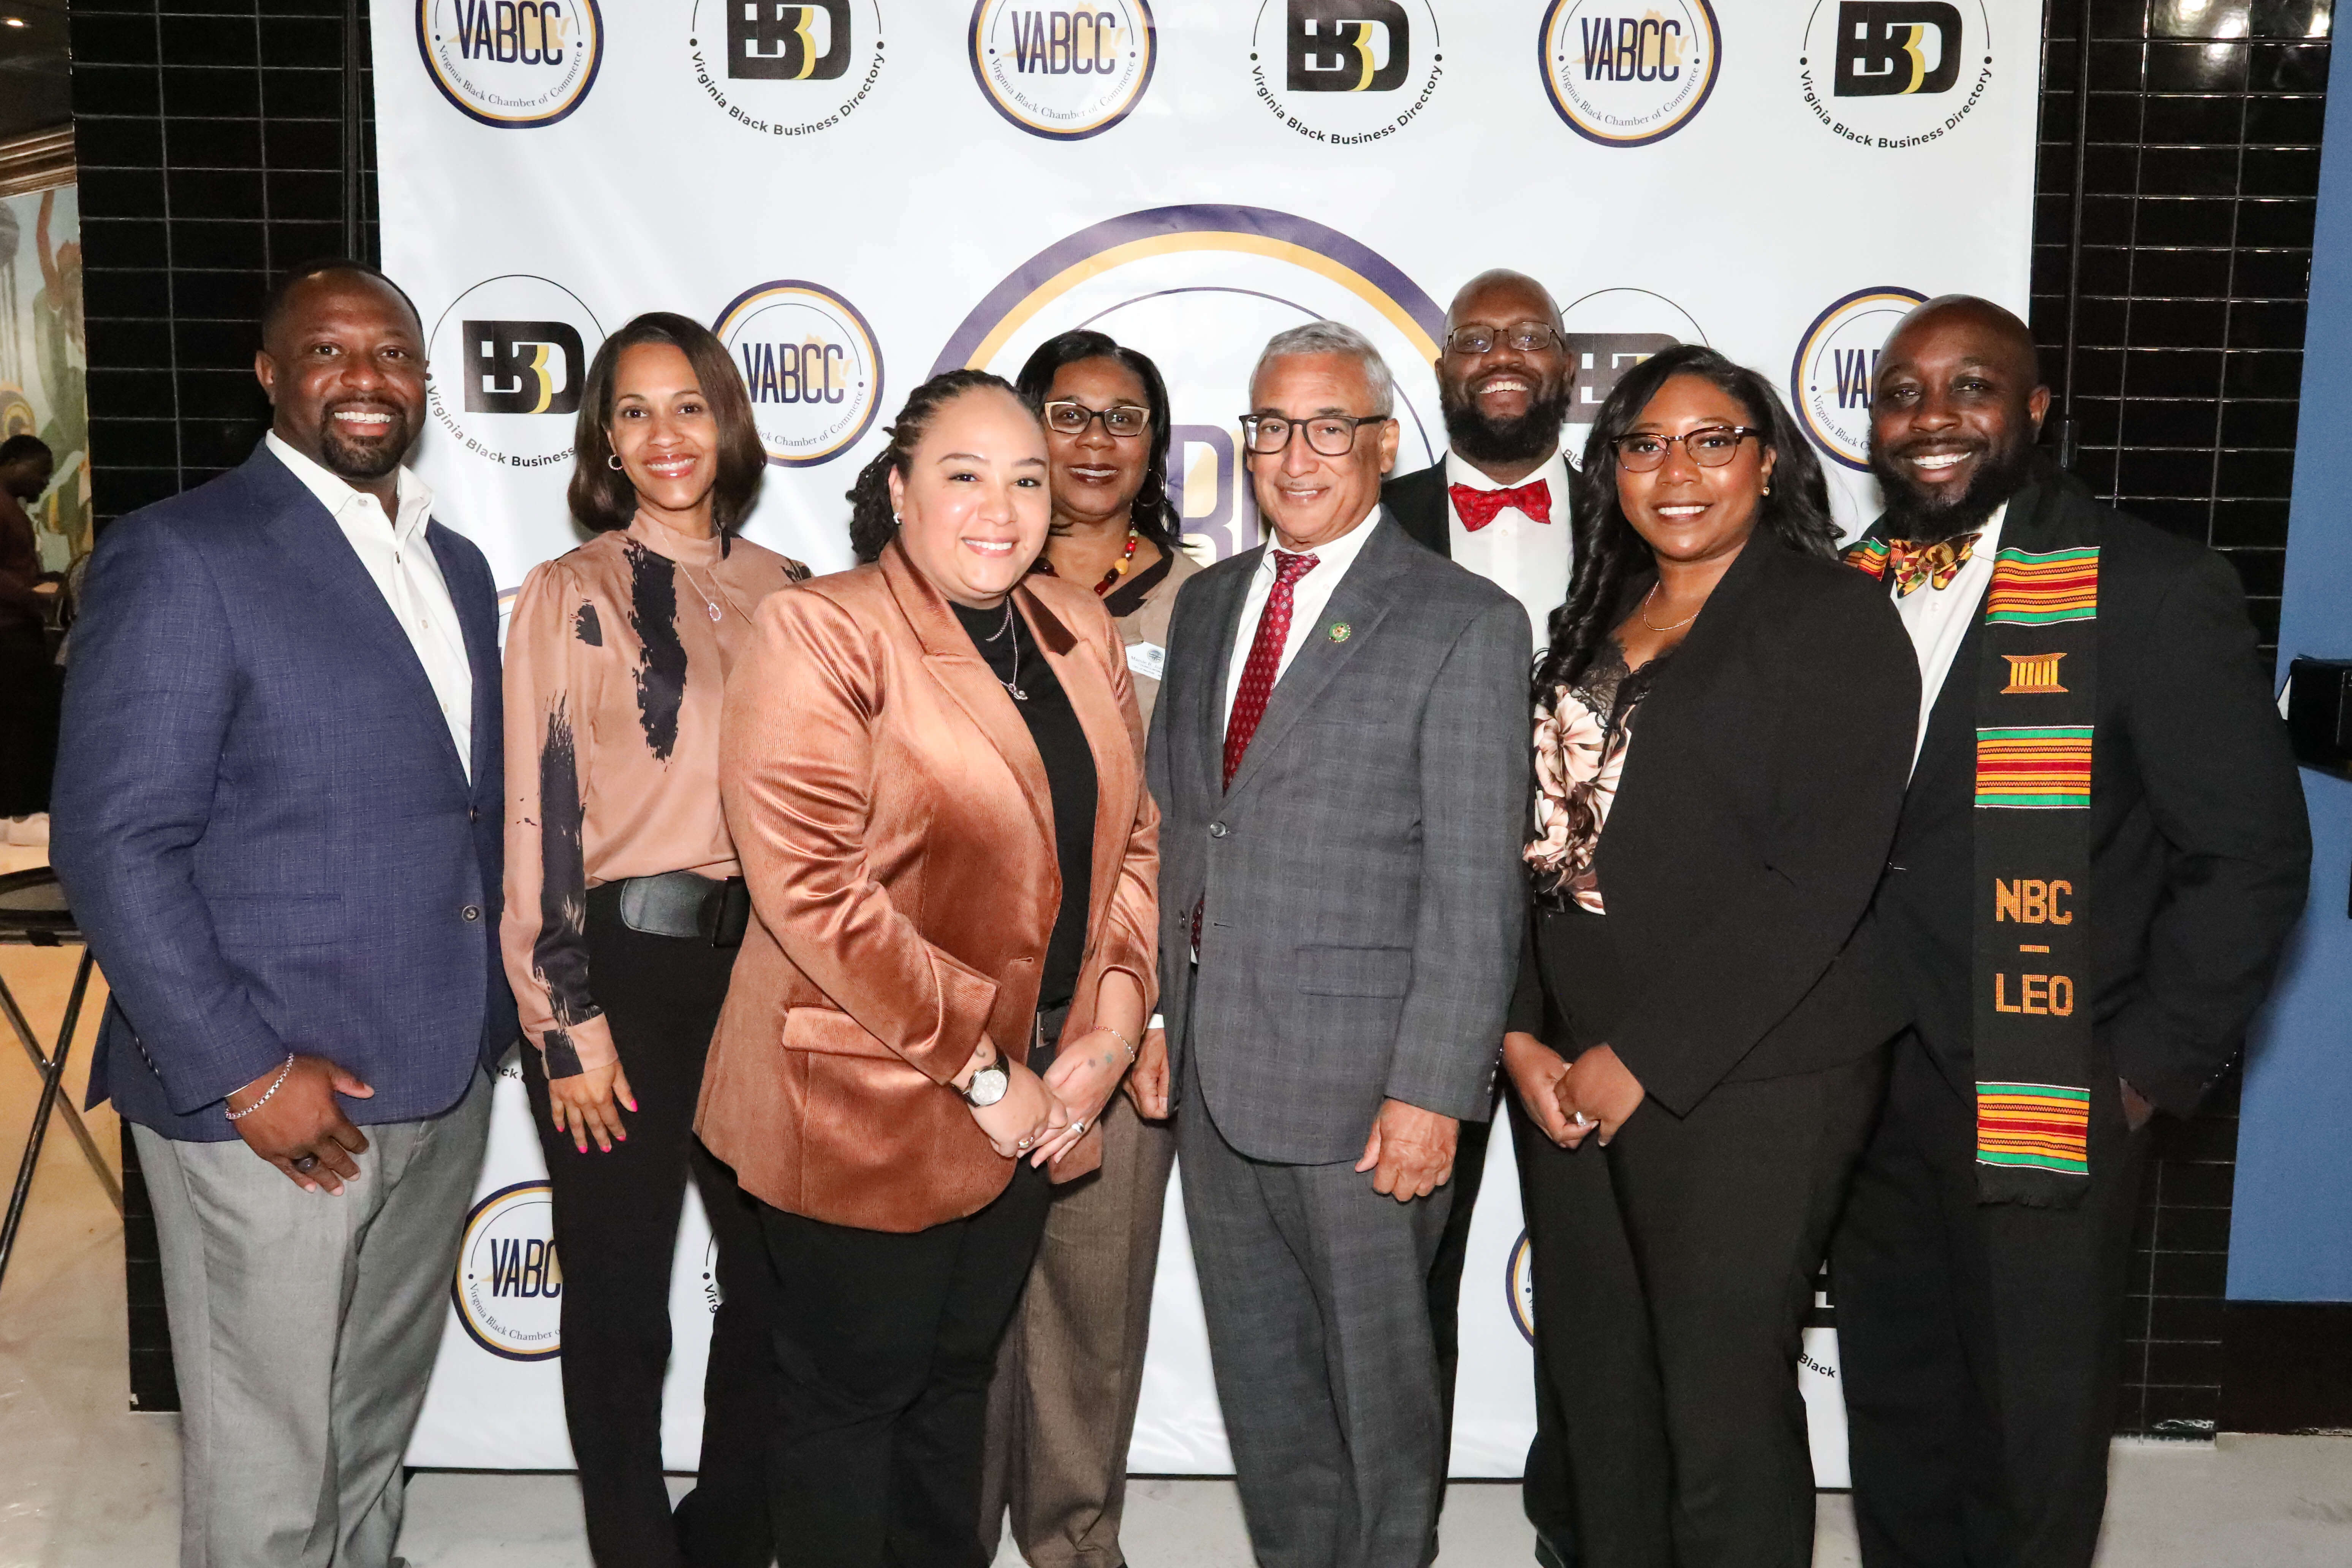 In this Photo Left to Right: Christopher B. Jones, a Councilman of Harrisonburg, Tiffany Boyle, Commissioner of Revenue in Newport News, Tracey J. Hall the Executive Vice President of the Virginia Black Chamber of Commerce, Mamie B. Johnson, a City Councilwoman of Norfolk, Congressman Bobby Scott, John T. Chapman, a City Councilman of Alexandria, Ernisha M. Hall the President & CEO of the Virginia Black Chamber of Commerce, and Derrick R. Wood, Mayor of Dumfries.